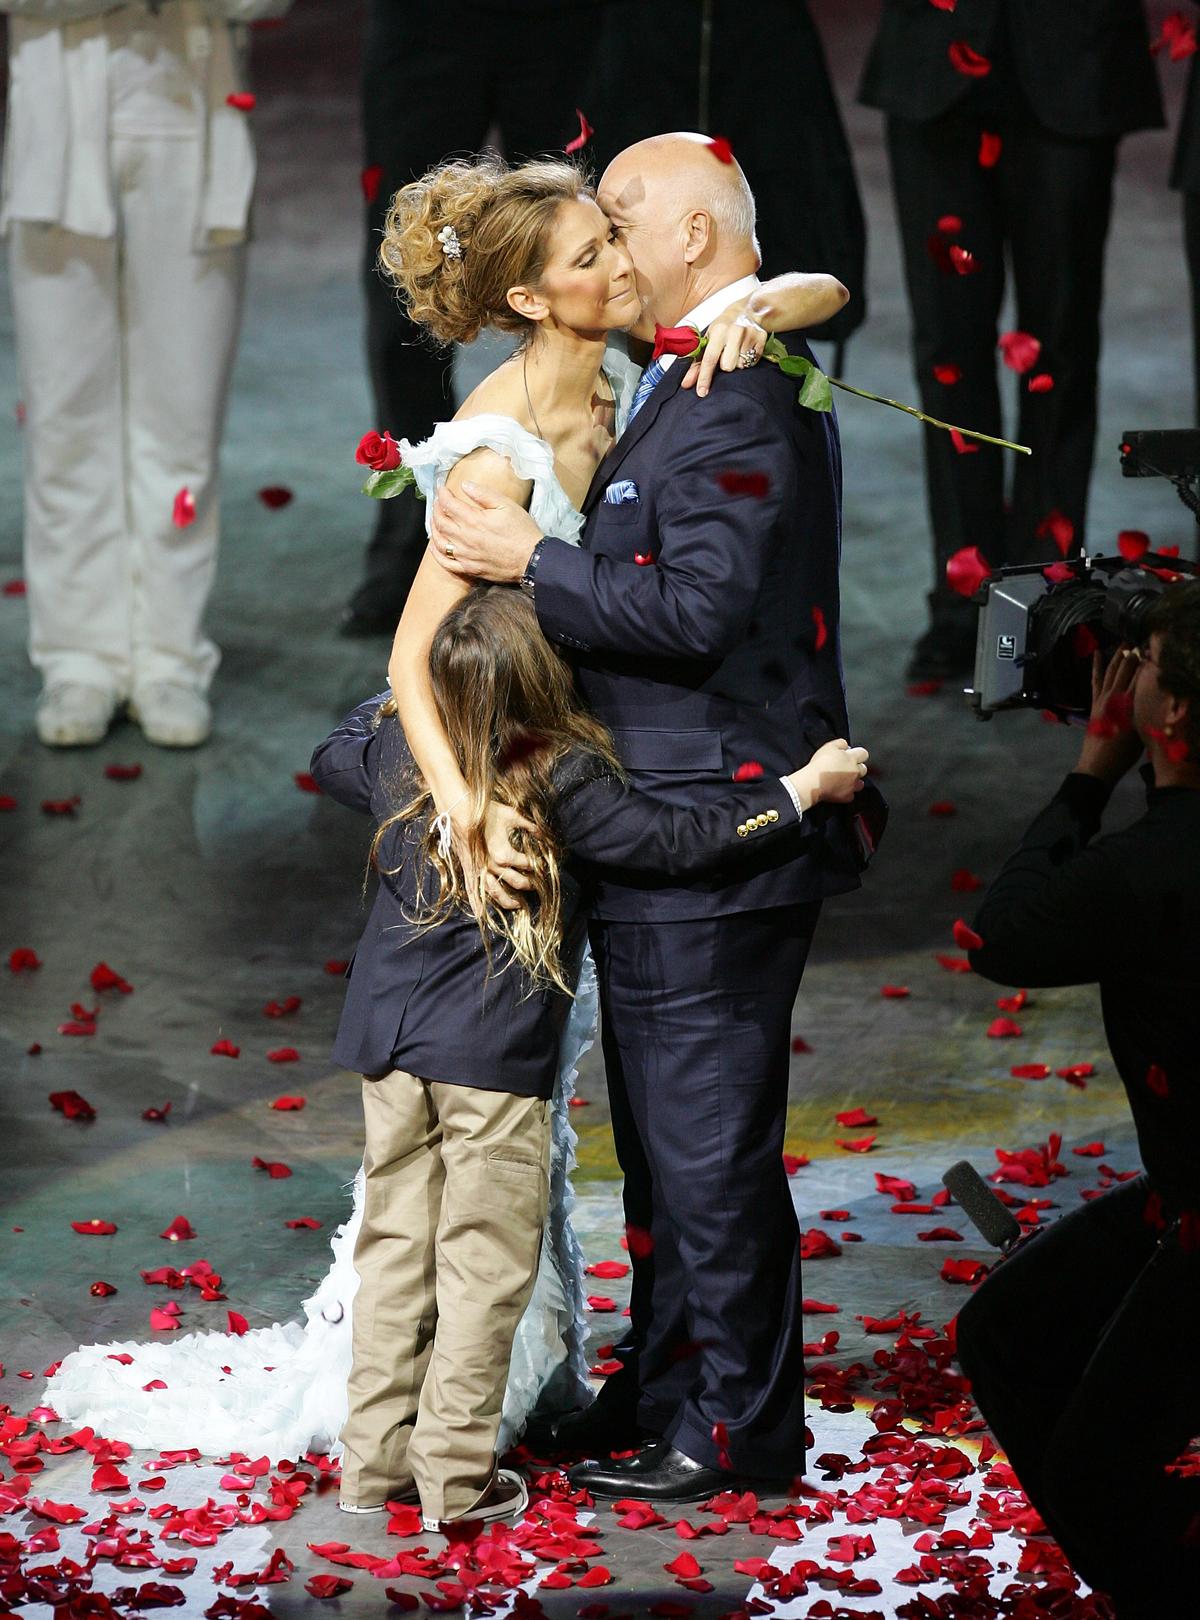 Celine Dion with her husband René Angélil and her son René-Charles Angélil in 2007 (©Getty Images | <a href="https://www.gettyimages.com.au/detail/news-photo/singer-celine-dion-is-embraced-by-her-husband-and-manager-news-photo/78504223">Ethan Miller</a>)